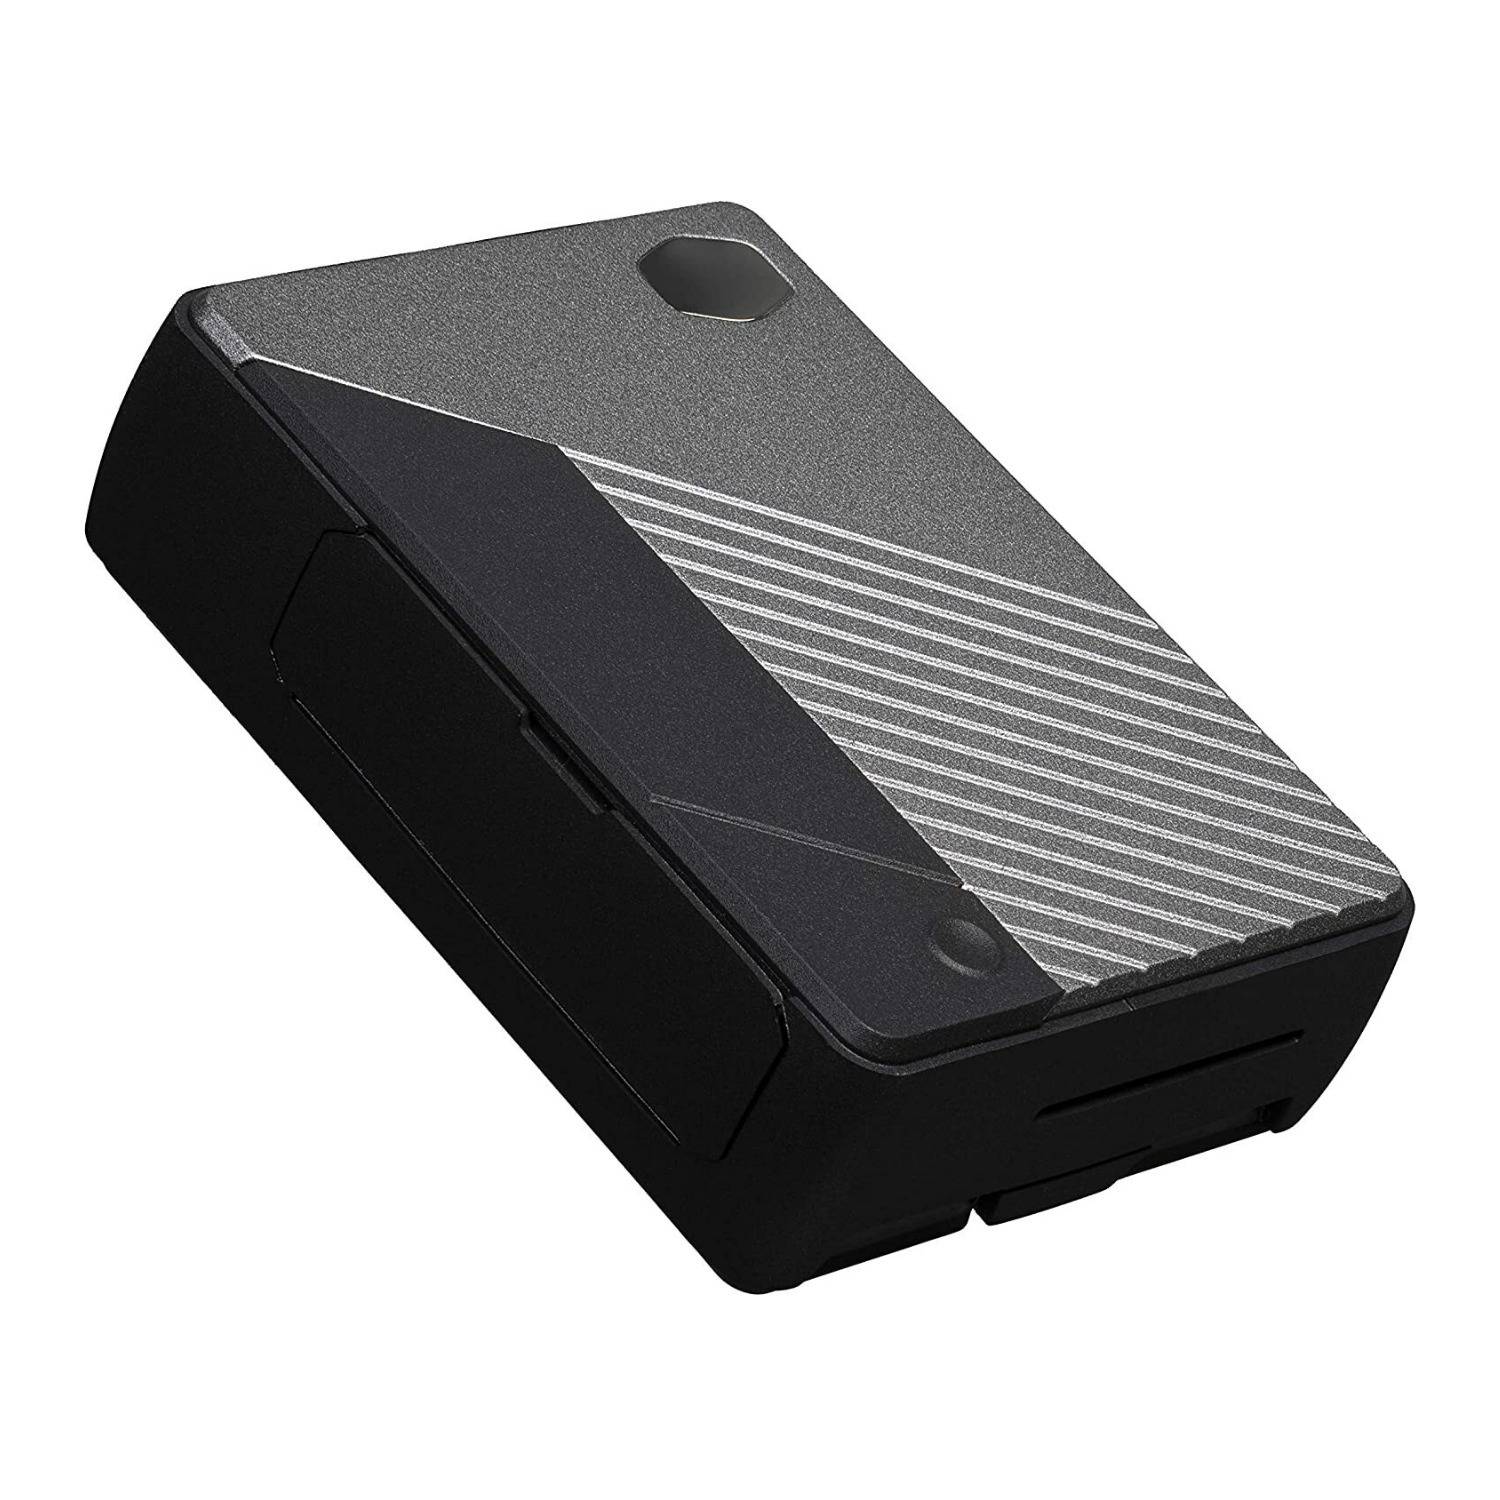 Cooler Master Pi Case 40 with Aluminum Core Heatsink, Easy-Access Ports, and Universal Mounting